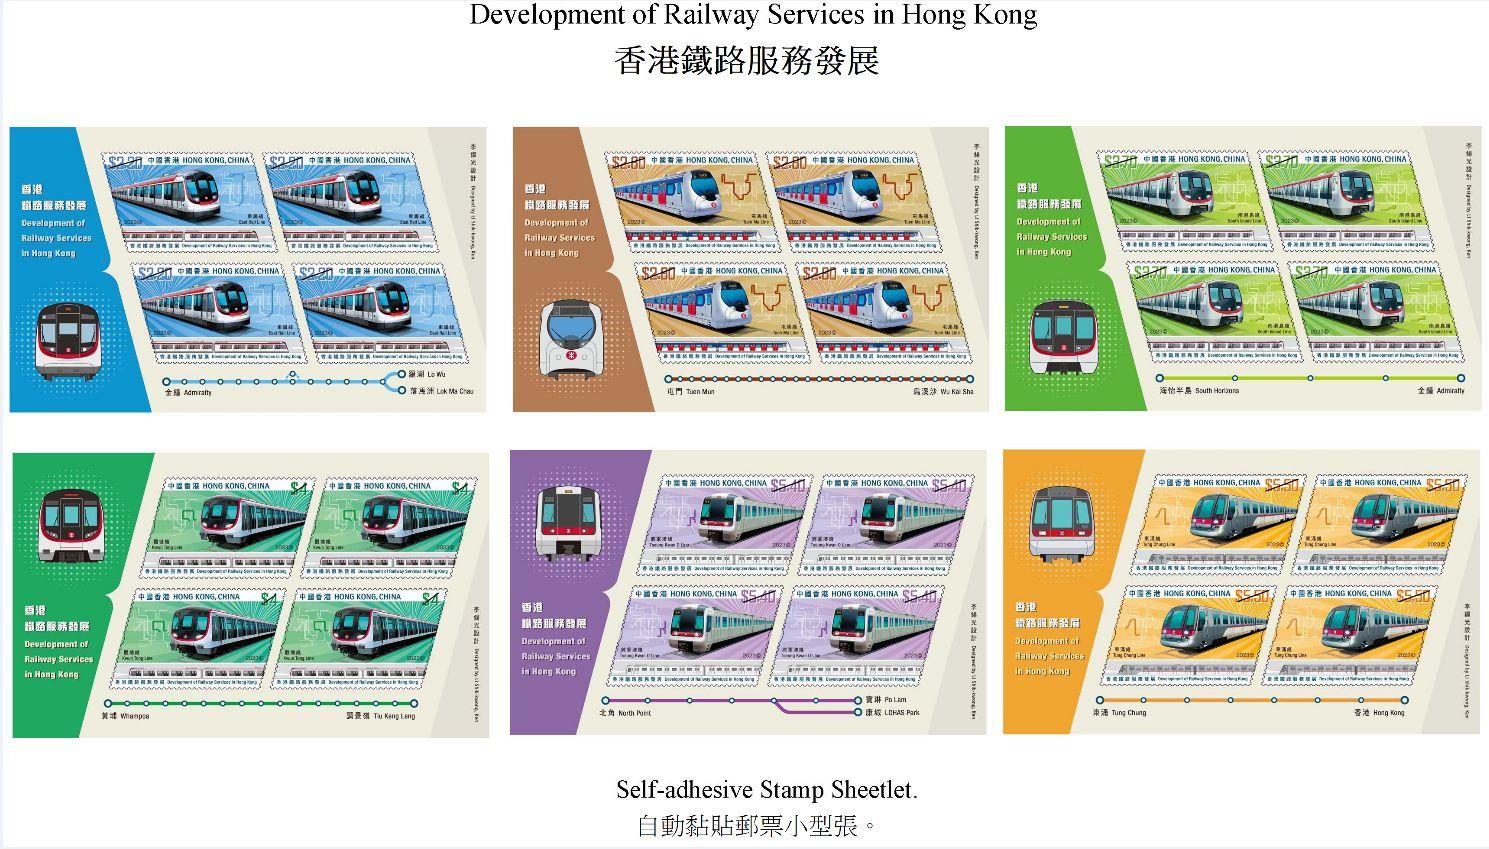 Hongkong Post will launch a special stamp issue and associated philatelic products on the theme of "Development of Railway Services in Hong Kong" on November 23 (Thursday). Photos show the self-adhesive stamp sheetlets.

